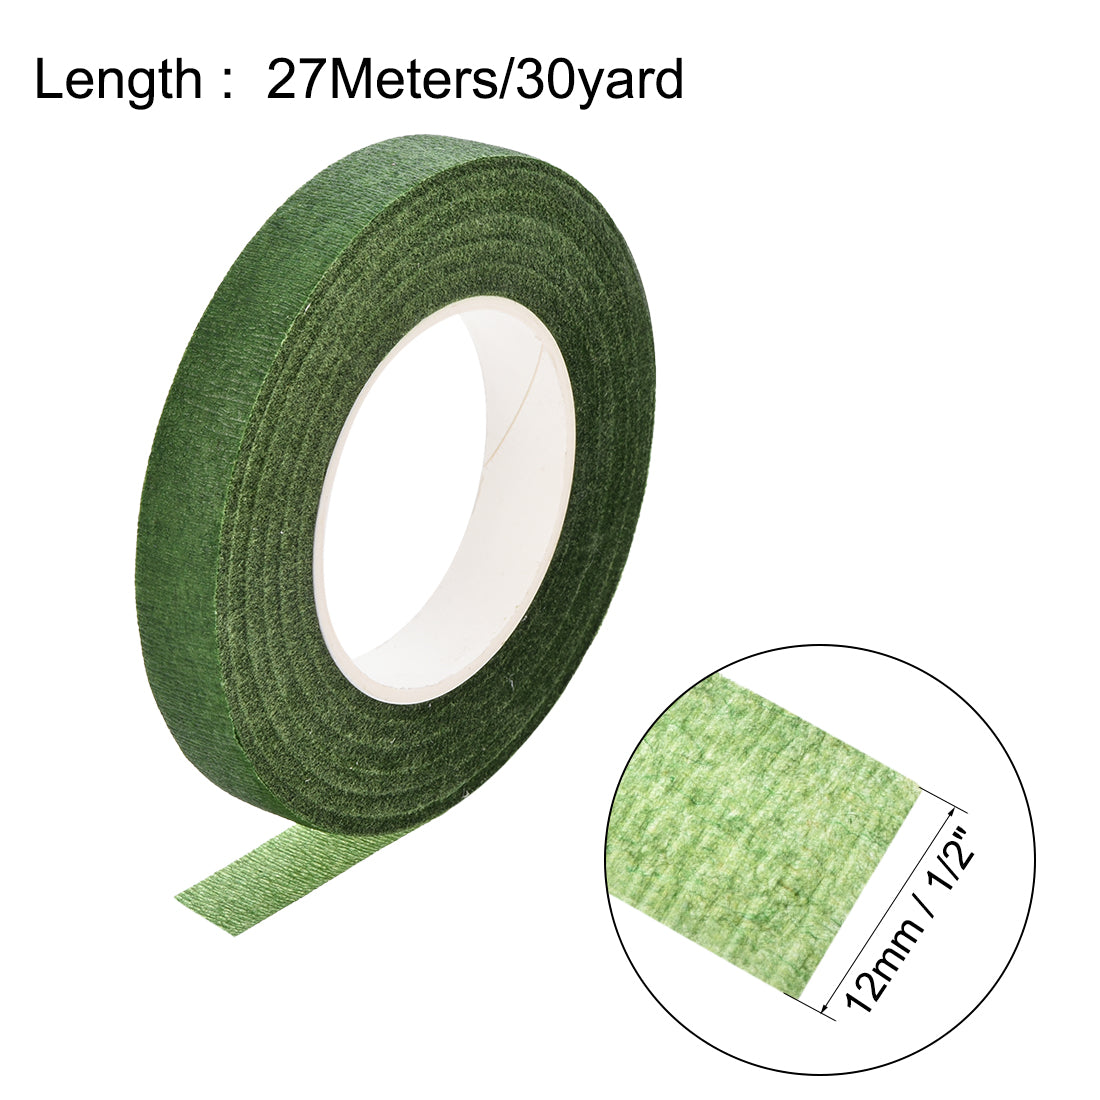 uxcell Uxcell 2Roll 1/2"x30Yard Green Floral Tape Flower Adhesives Floral Arrangement Kit